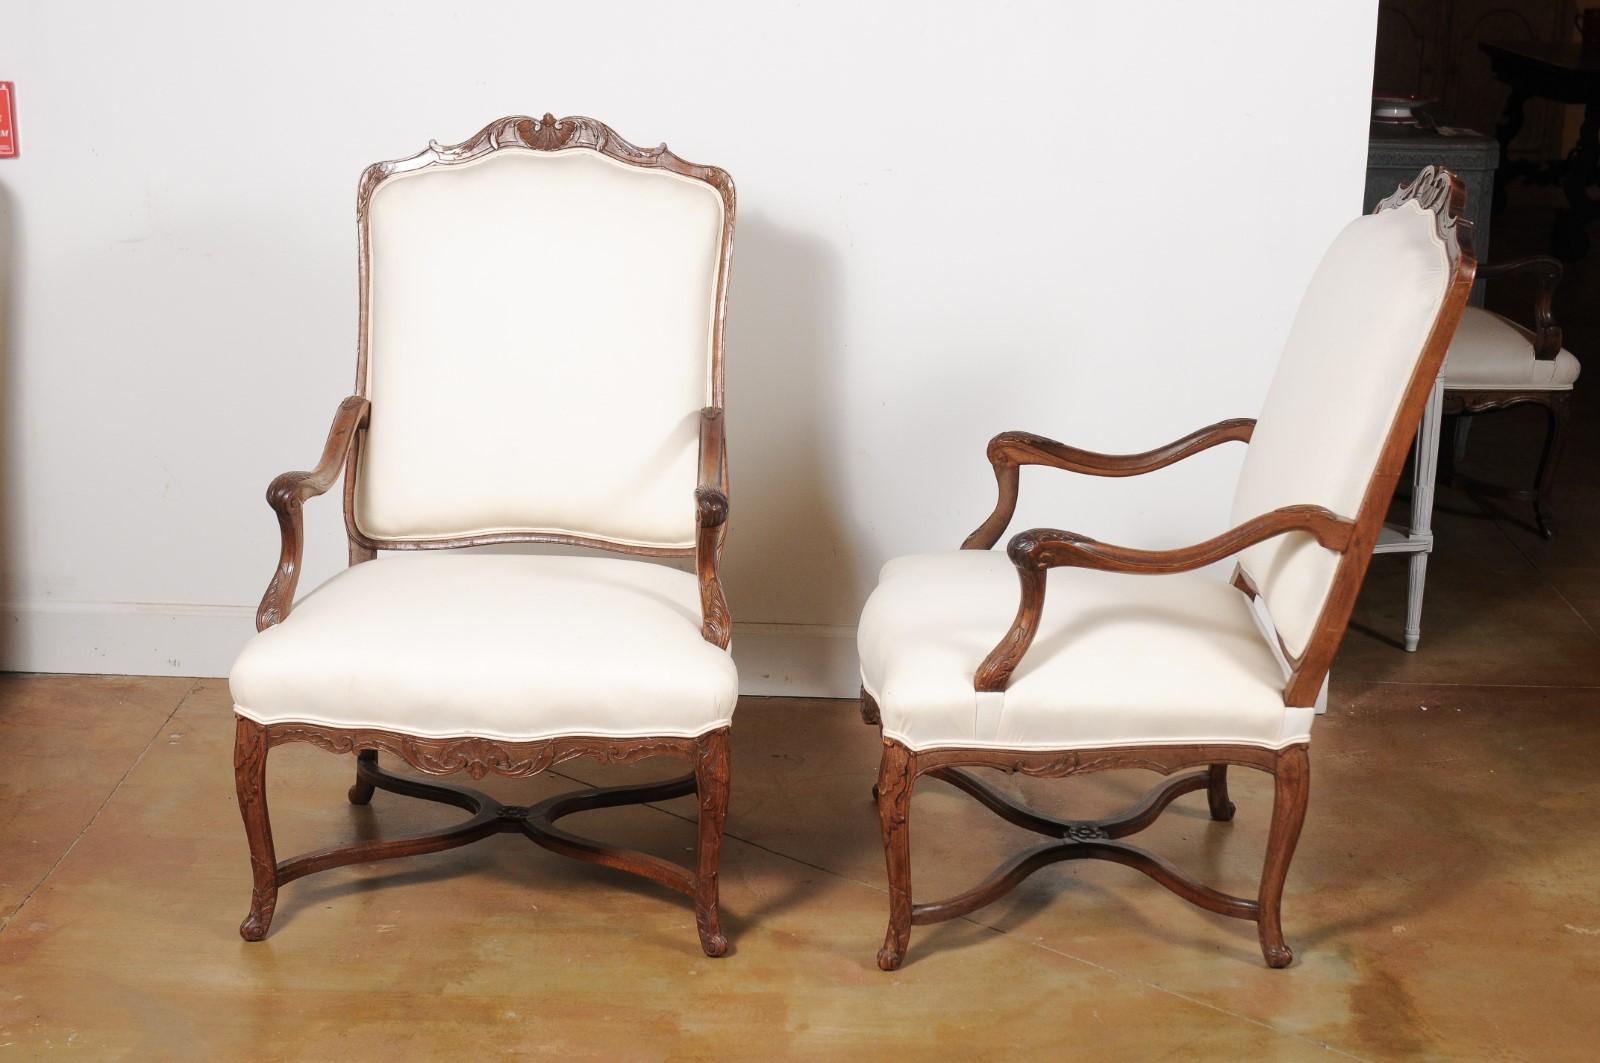 Pair of Early 18th Century French Régence Walnut Armchairs with New Upholstery 2